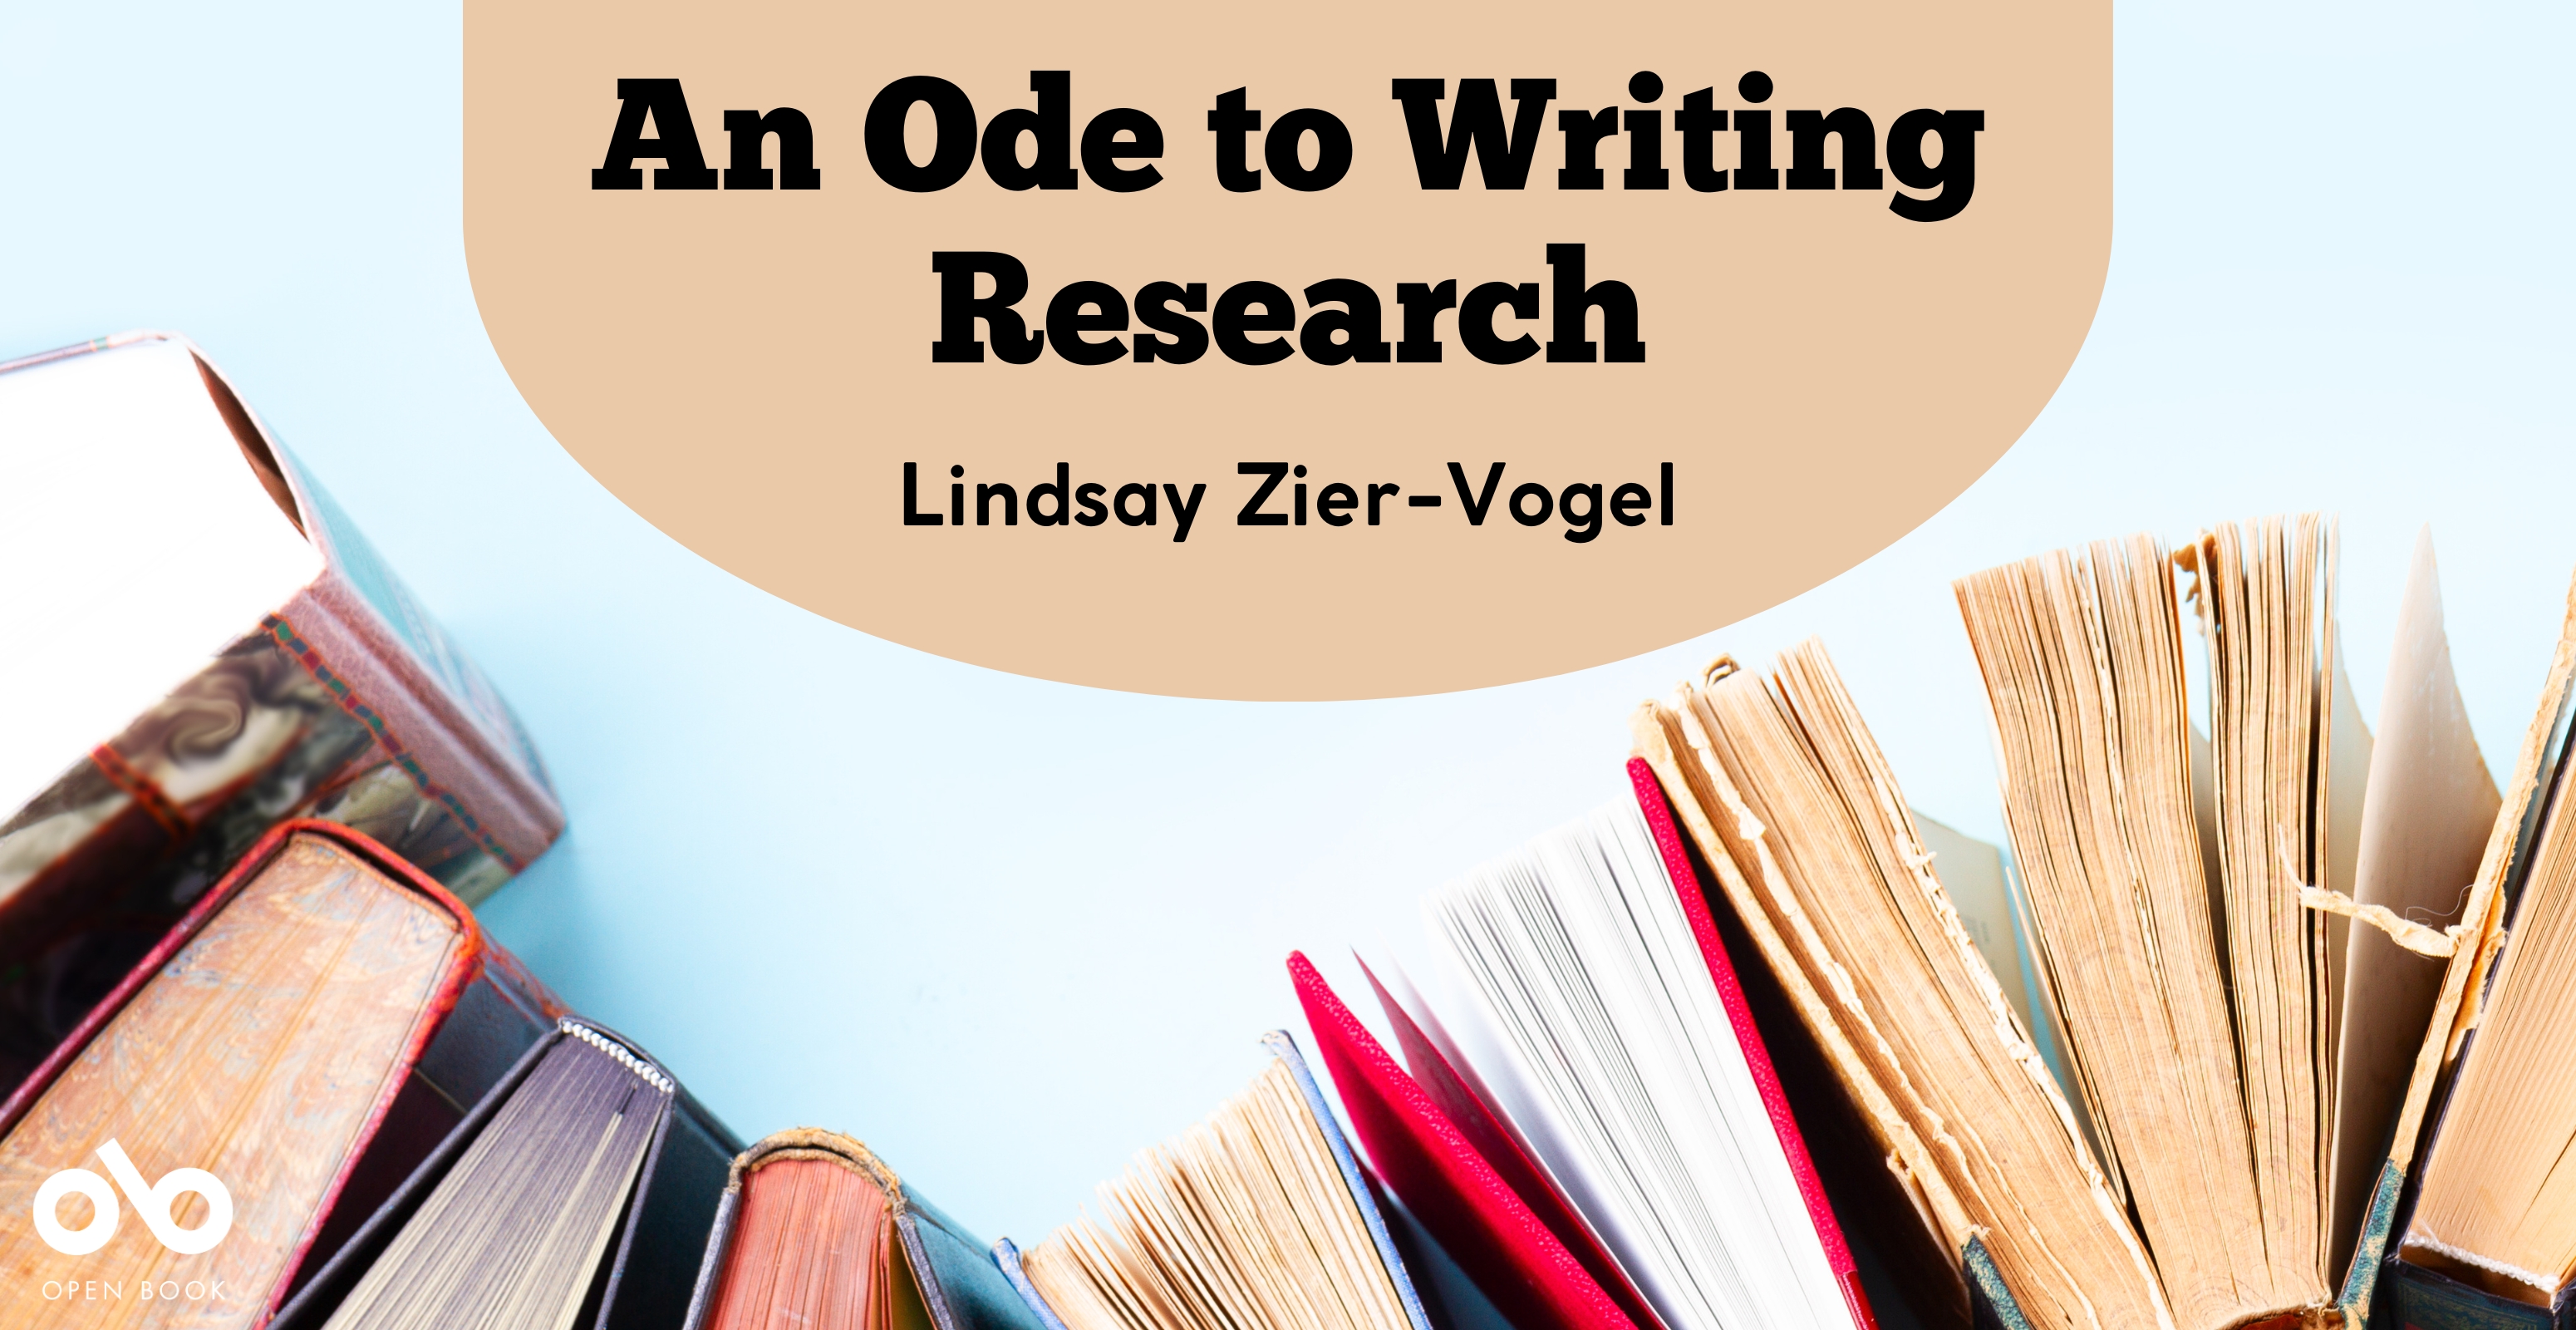 An Ode to Writing Research - Lindsay Zier-Vogel